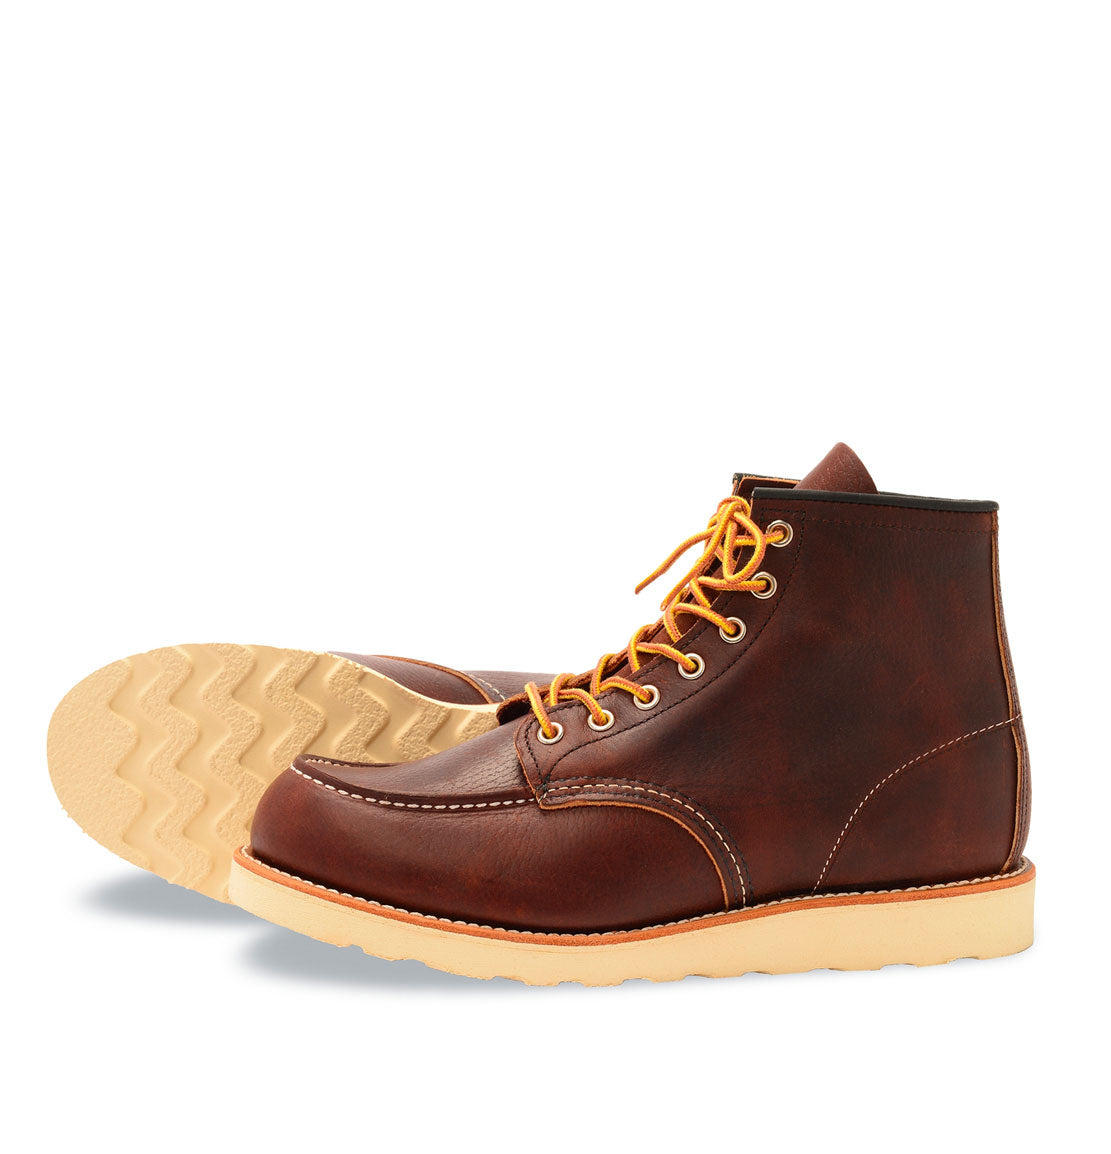 Red wing Moc toe 8138